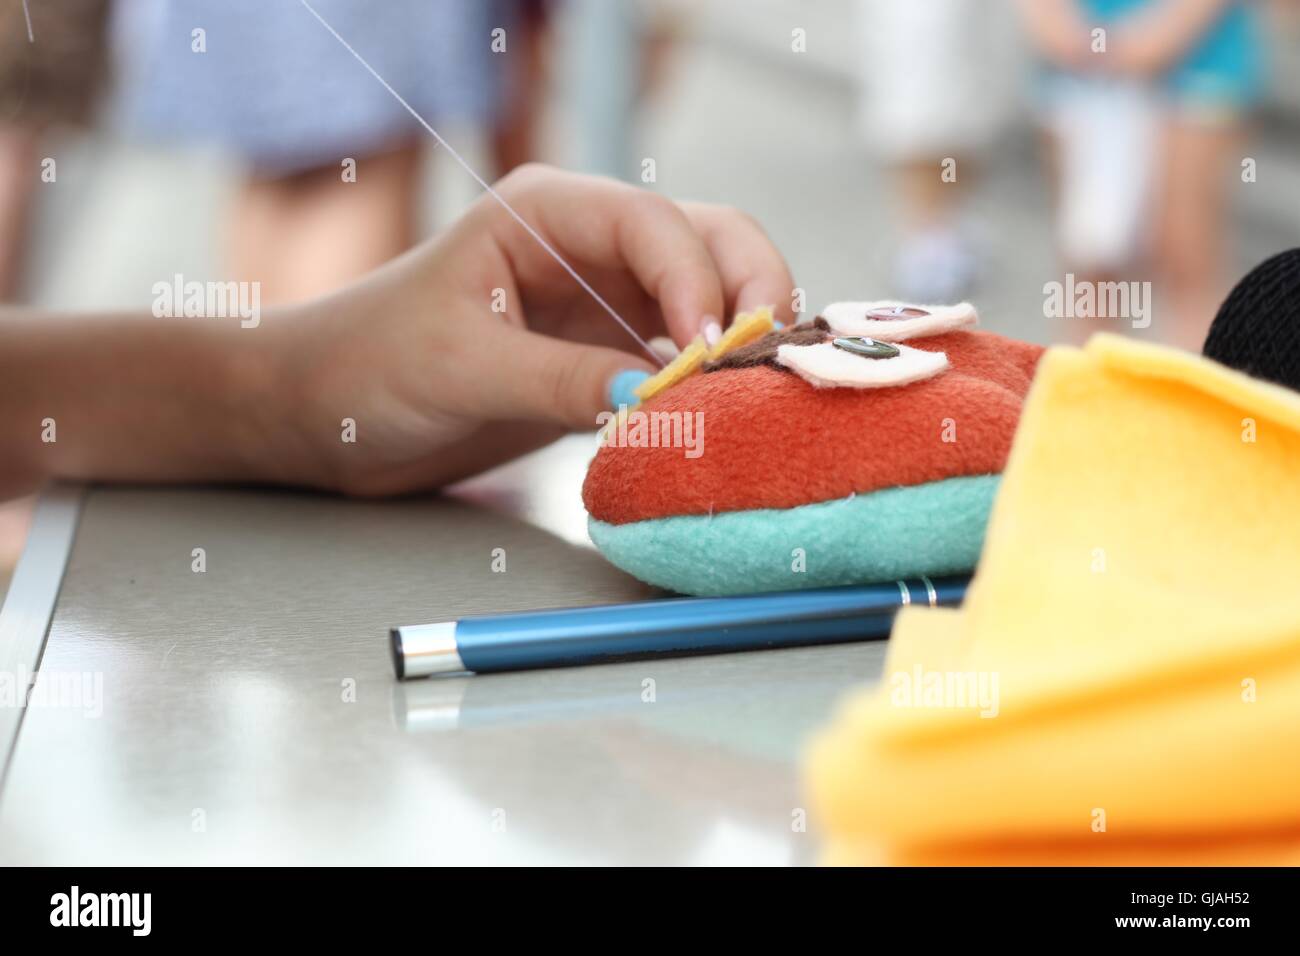 hand sawing toy - creative hobby in childrens hand Stock Photo